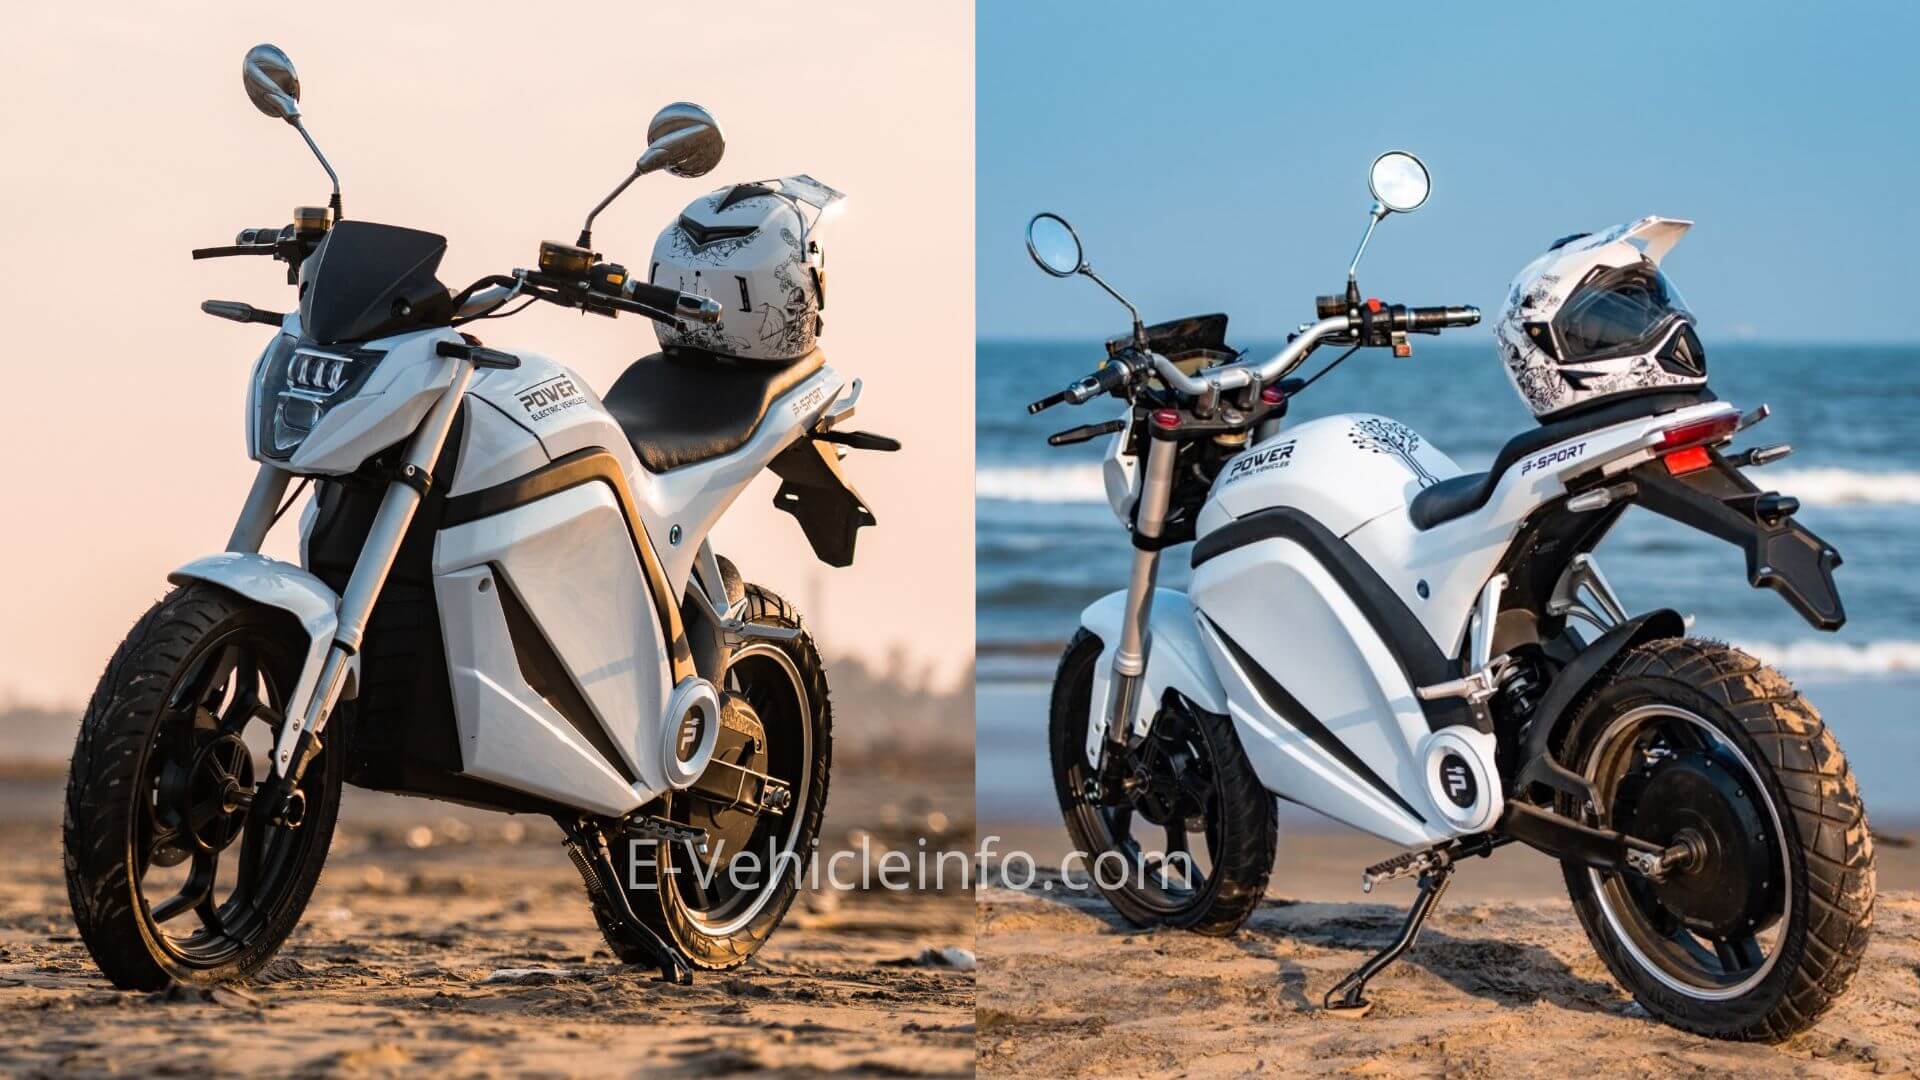 https://e-vehicleinfo.com/power-ev-p-sport-electric-motorcycle-price-range-and-launch/